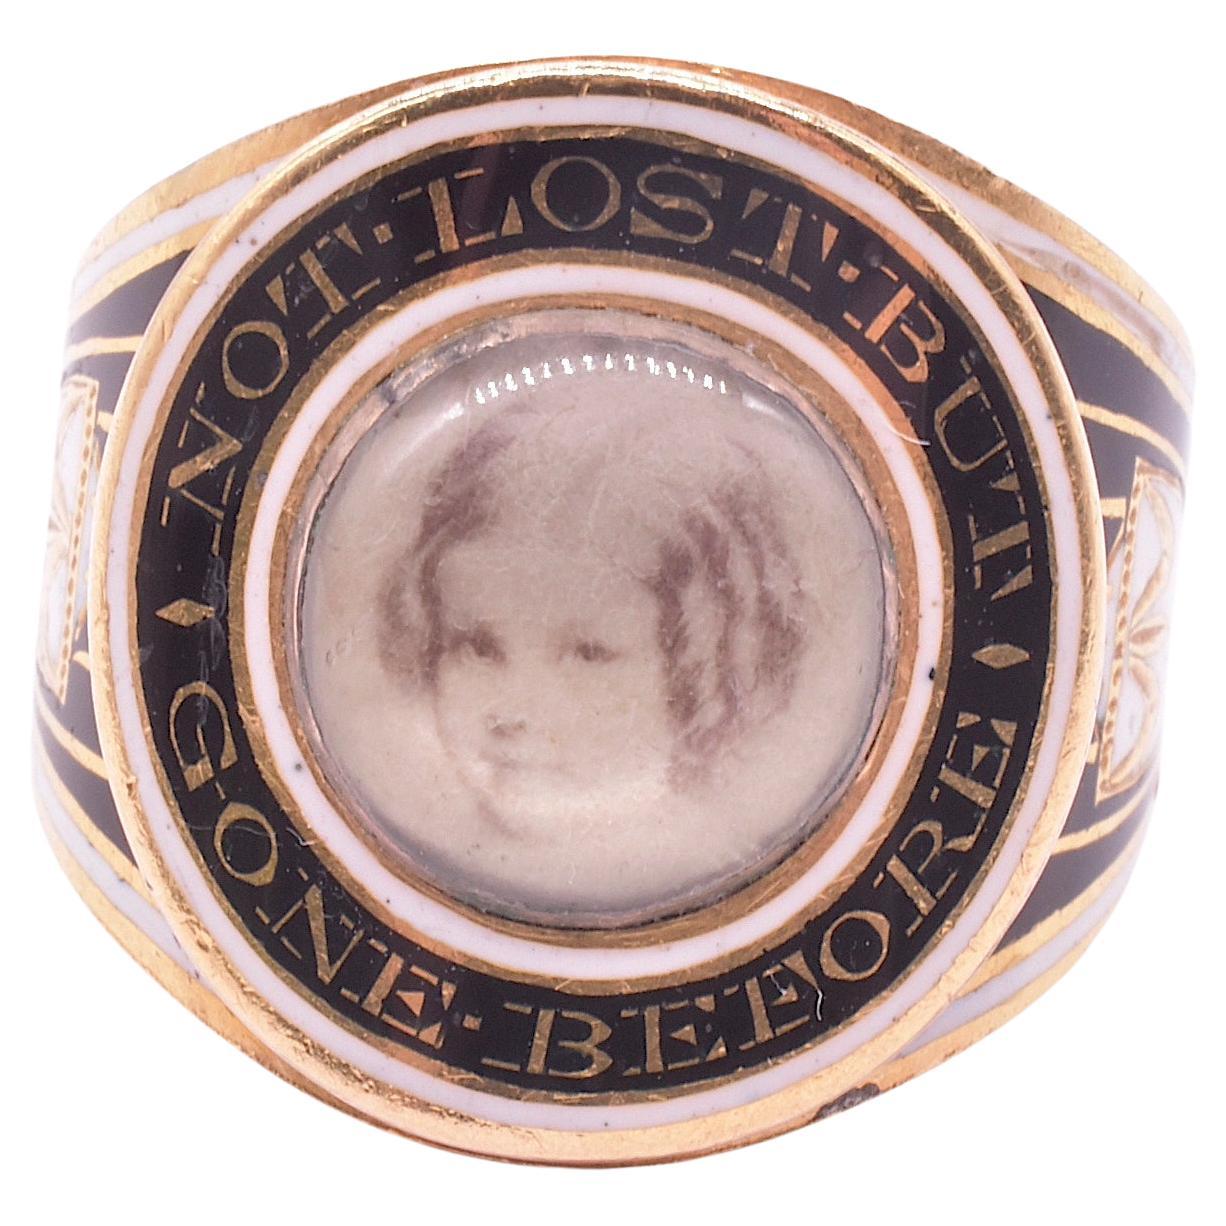 Neoclassical Enamel Memorial Ring with Painted Portrait of a Young Girl